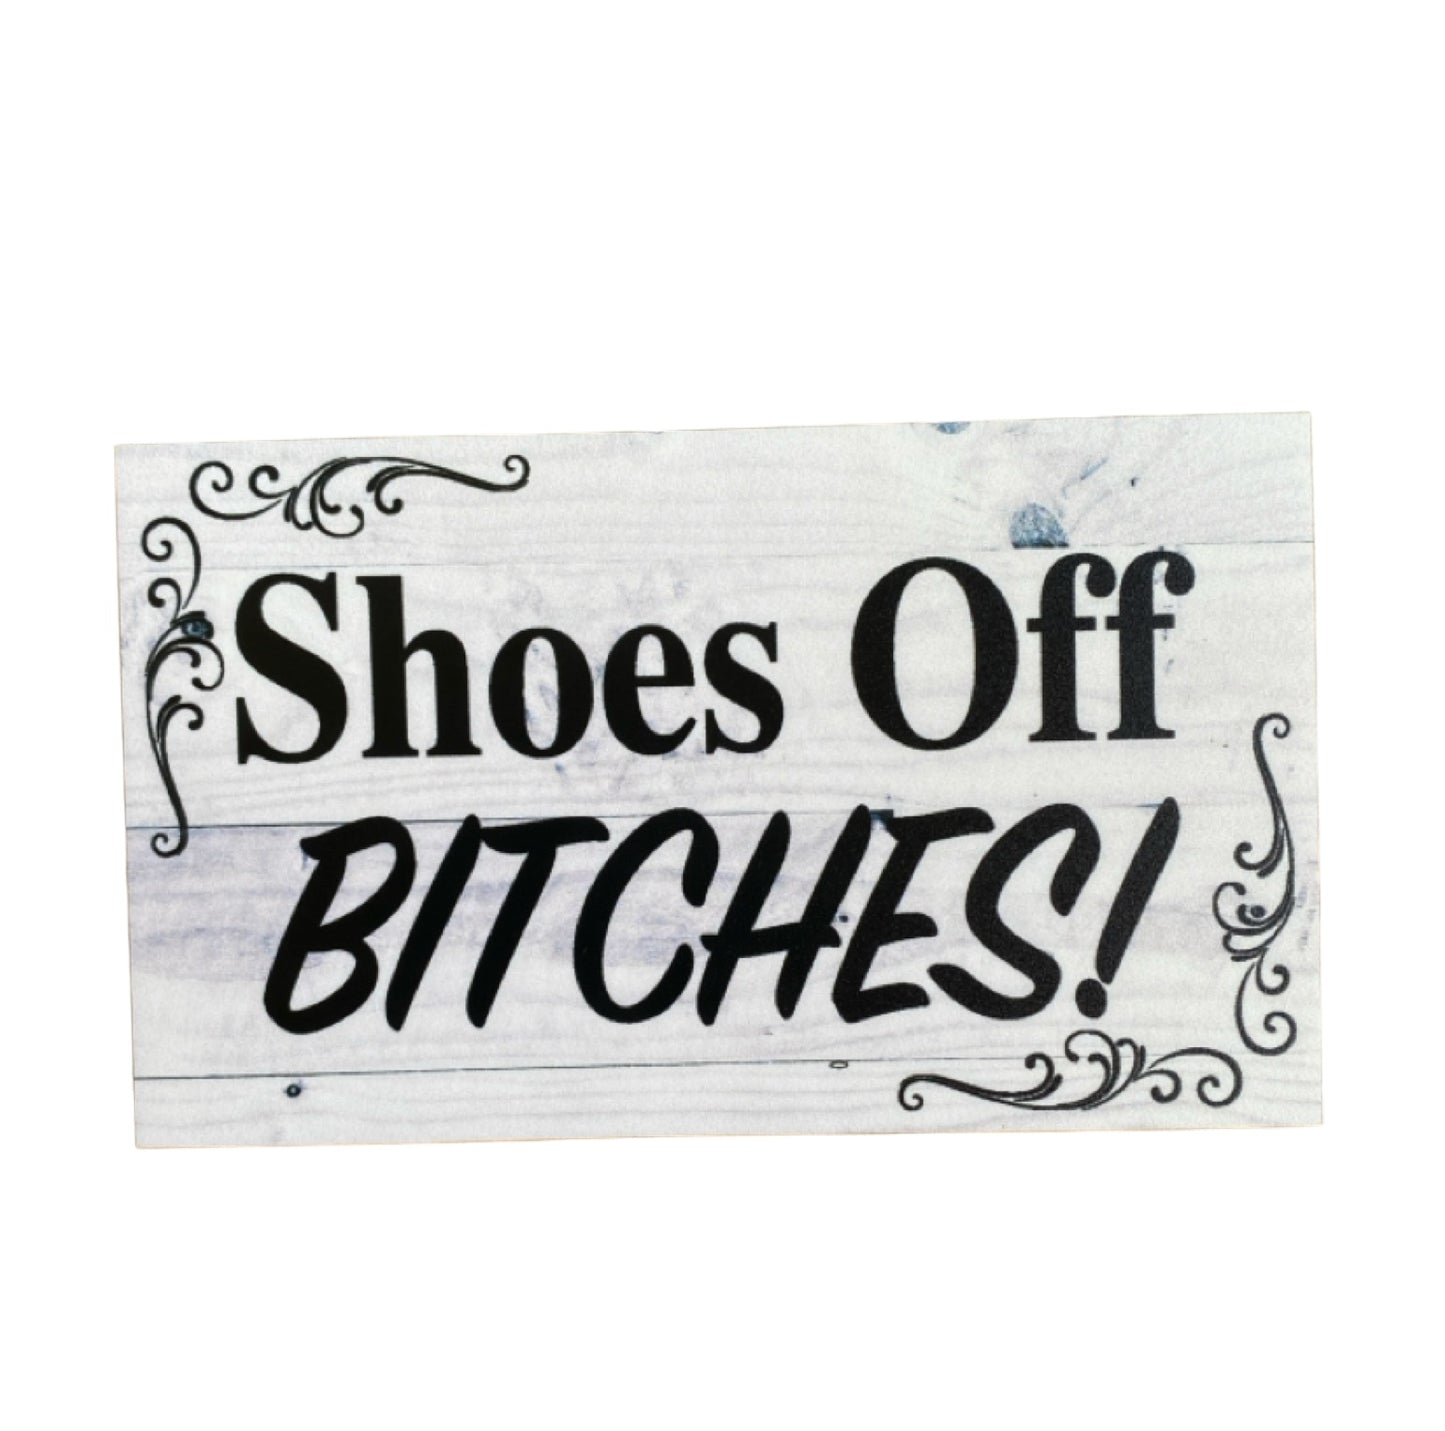 Shoes Off Bitches Sign - The Renmy Store Homewares & Gifts 